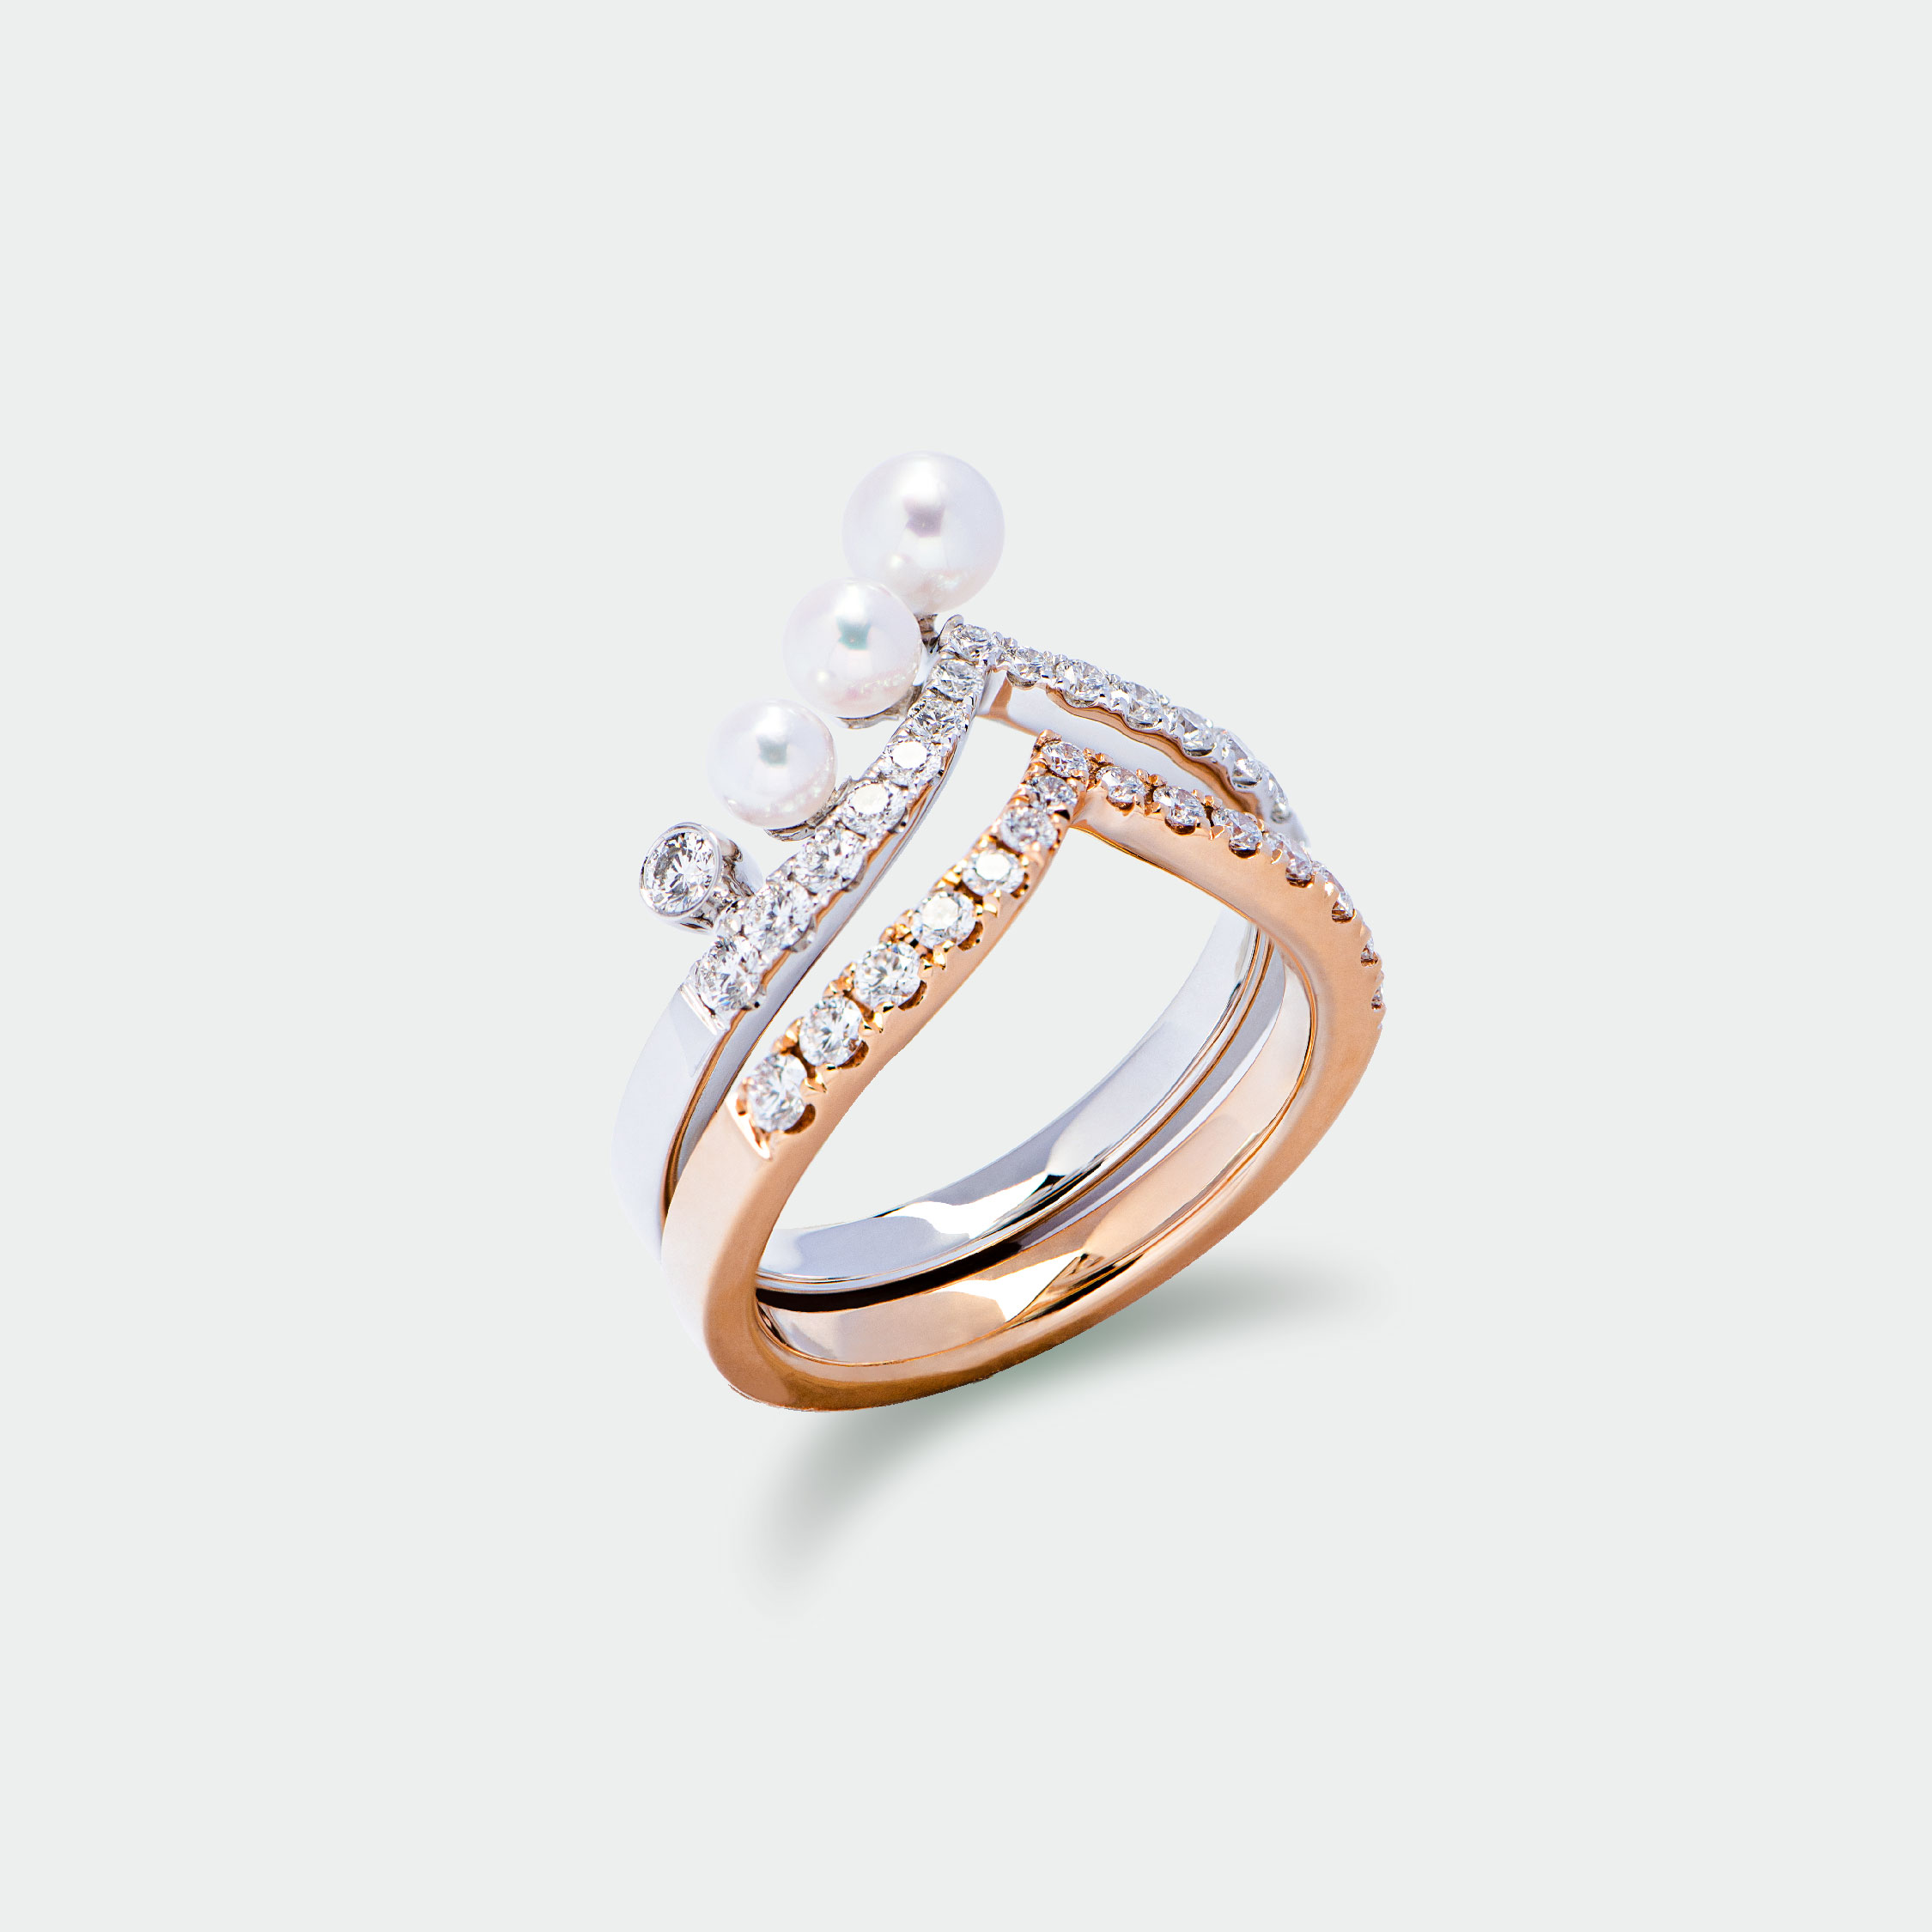 White Pearl Diamond Ring with Gold Stackable Rings